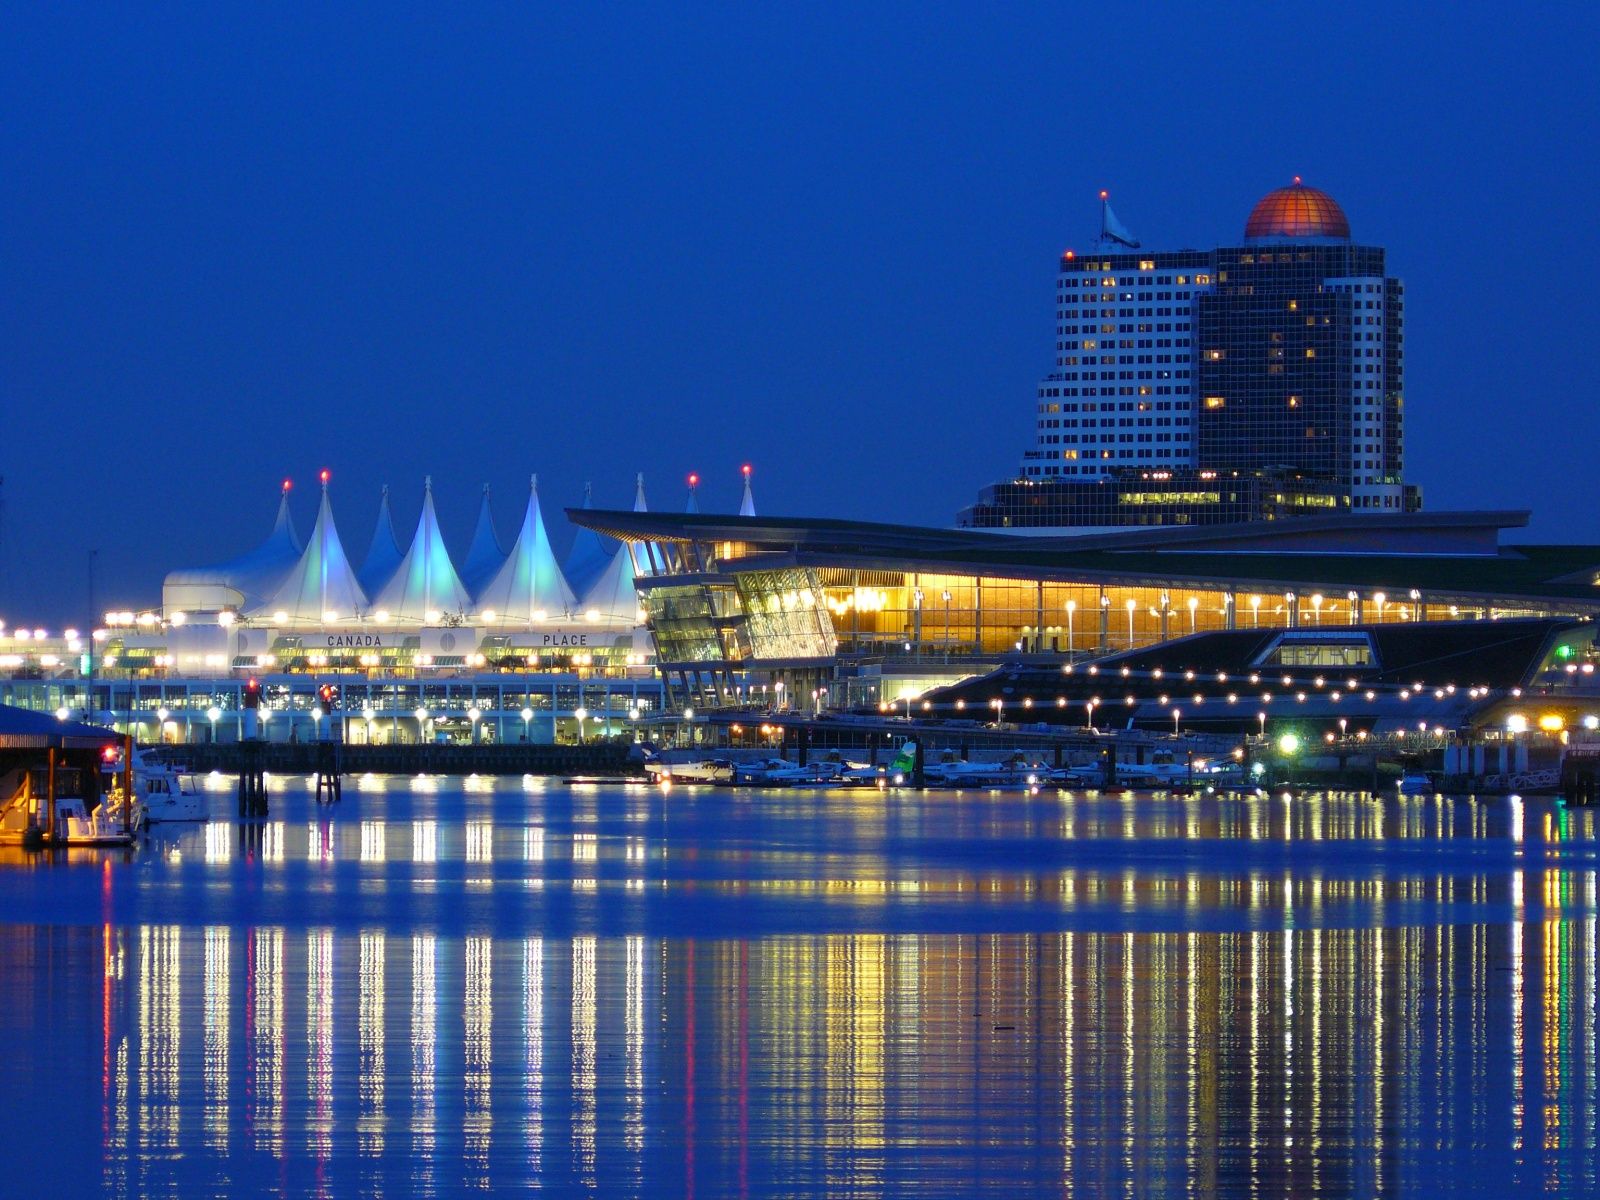 The Vancouver Convention Centre is stunning at night.